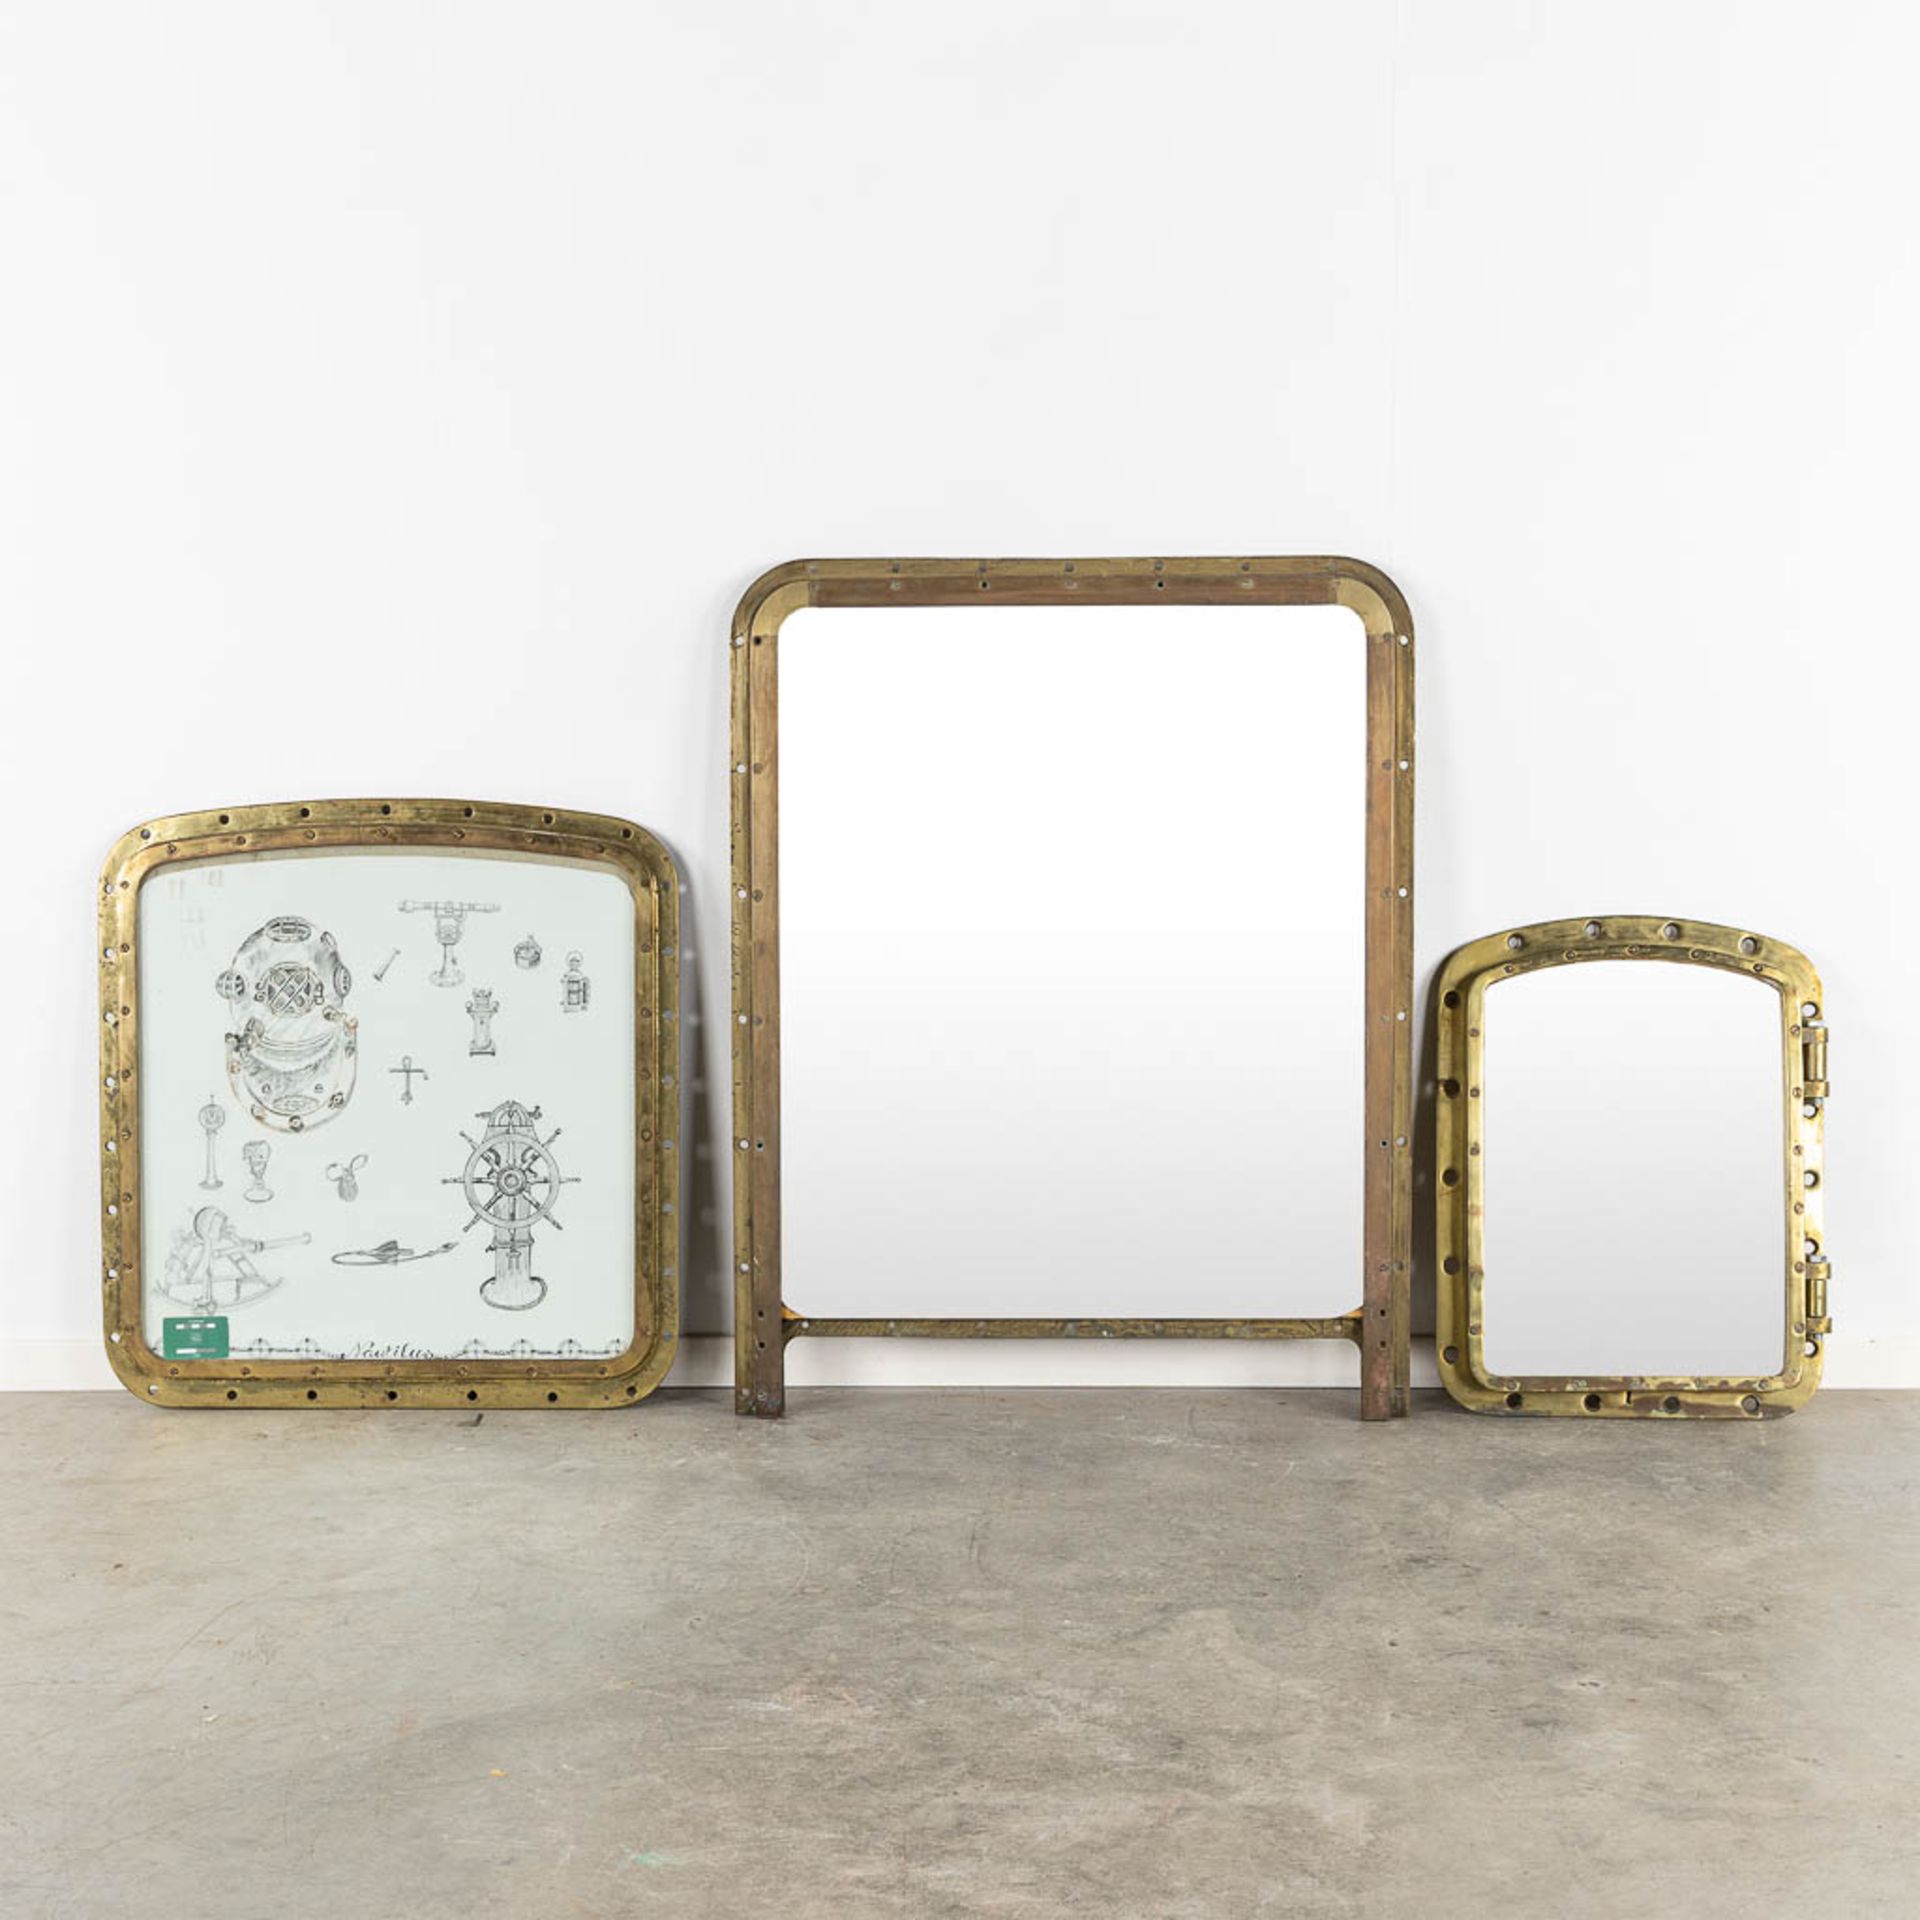 Three various Portholes, bronze and glass. Two changed into a mirror. (W:86 x H:110 cm) - Image 2 of 7